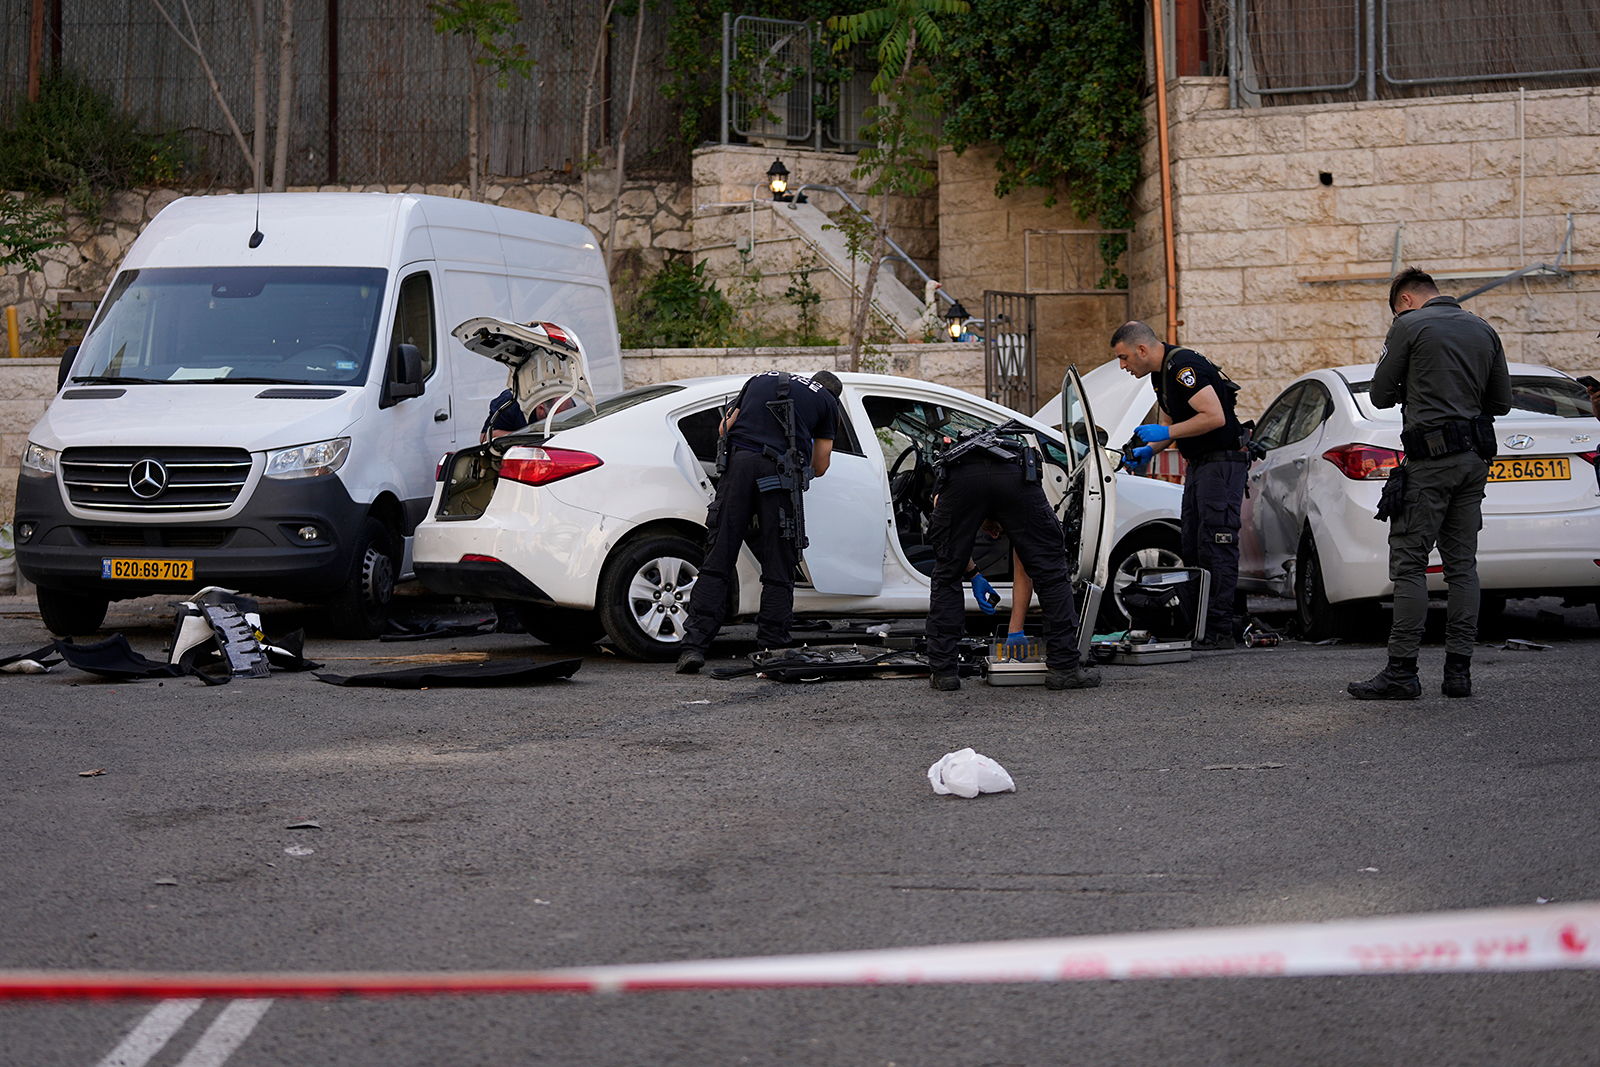 Israeli police investigate the scene of a suspected ramming attack that wounded three people on the eve of the Jewish holiday of Passover, in Jerusalem, on April 22.